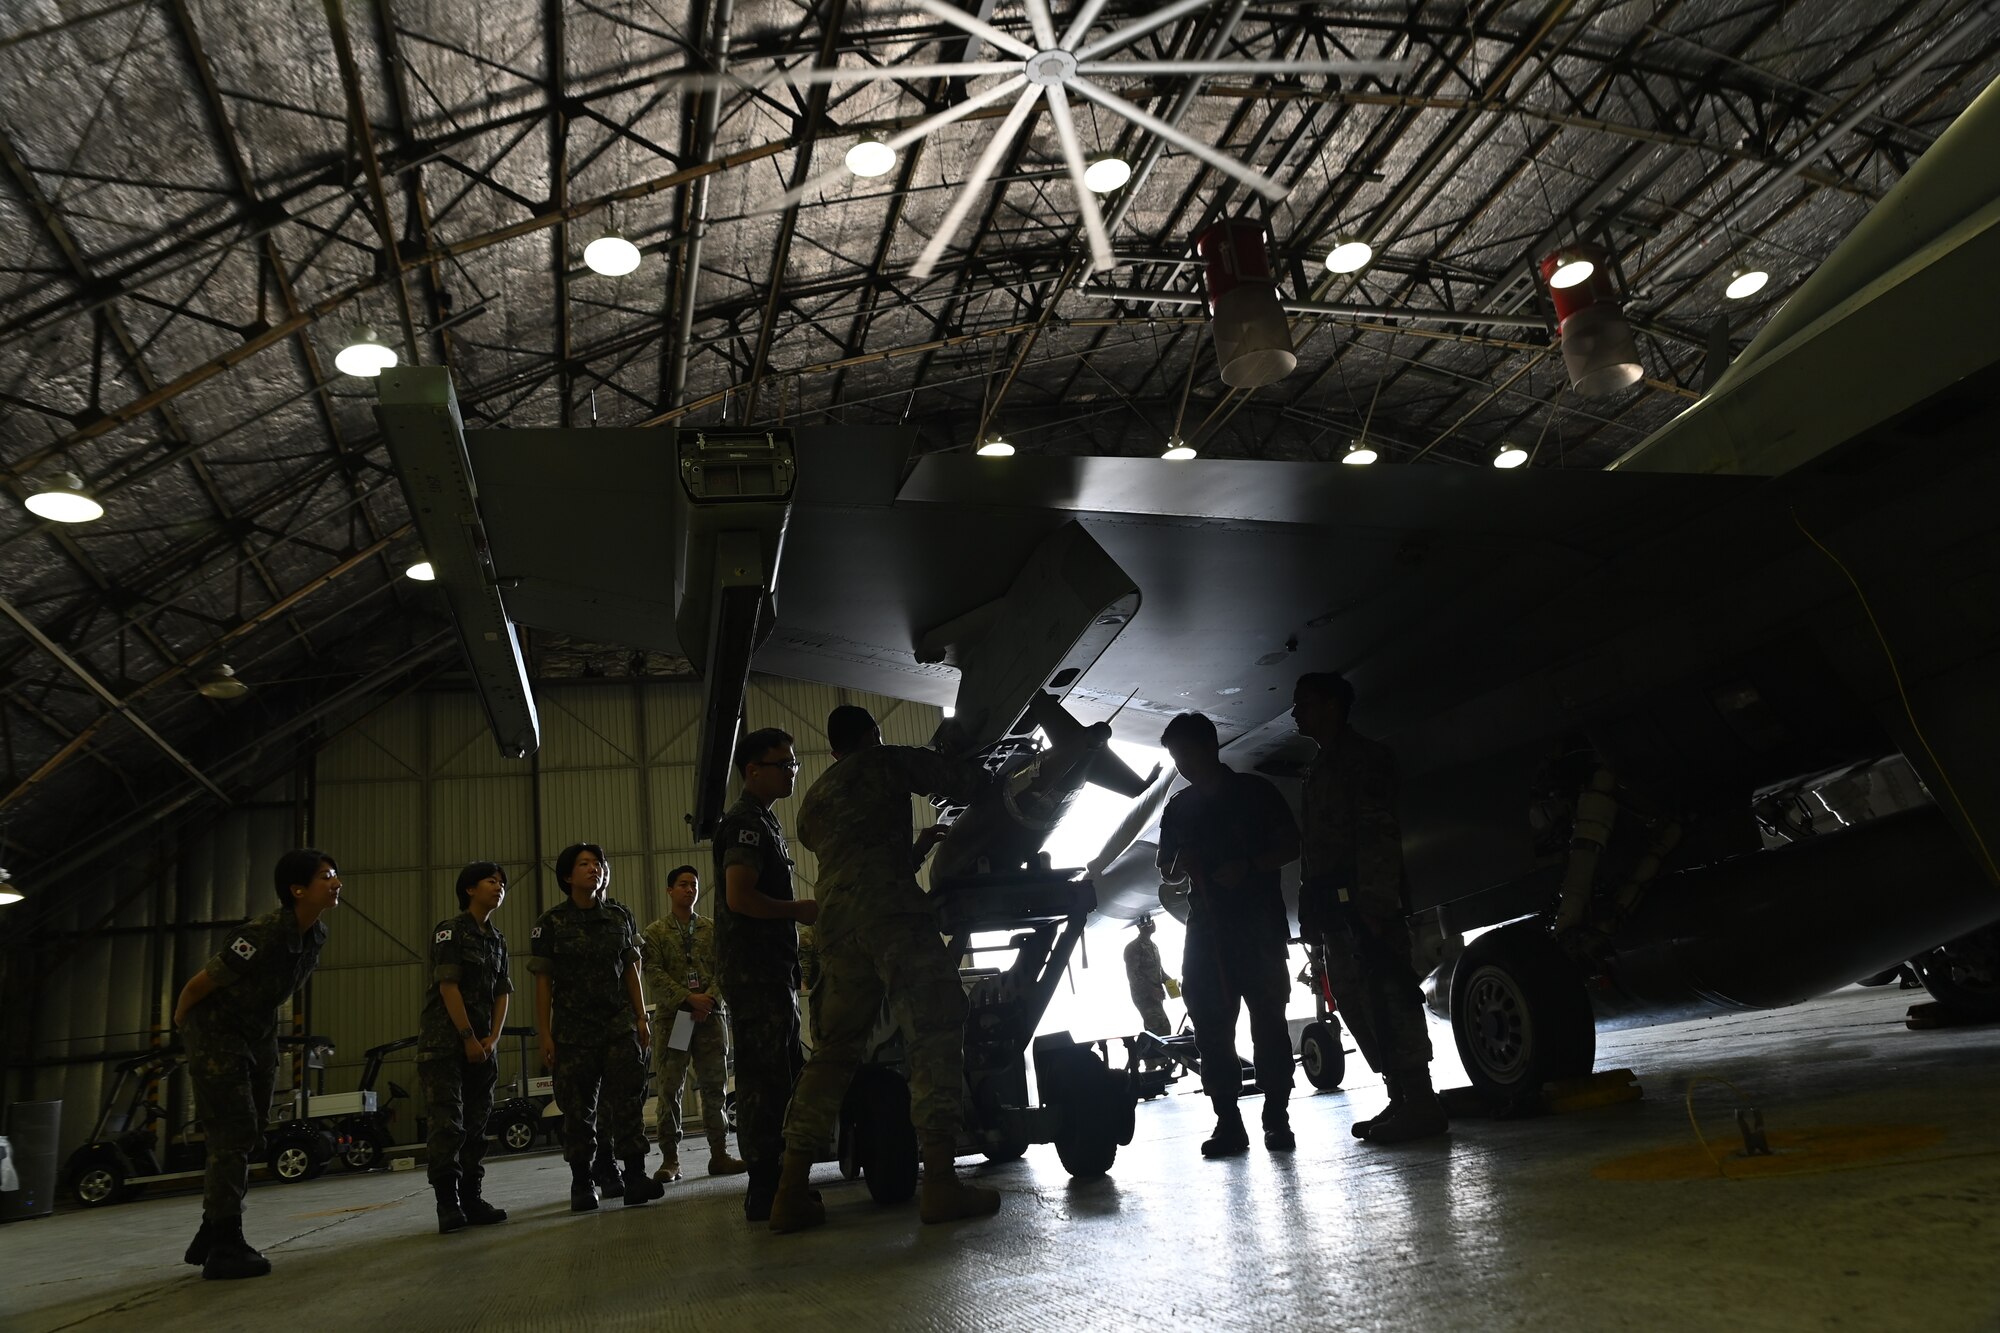 Republic of Korea Air Force interpretation officers in training observe a weapons load demonstration by U.S. Air Force Airmen from the 51st Maintenance Group during an immersion tour at Osan Air Base, ROK, July 25, 2023.